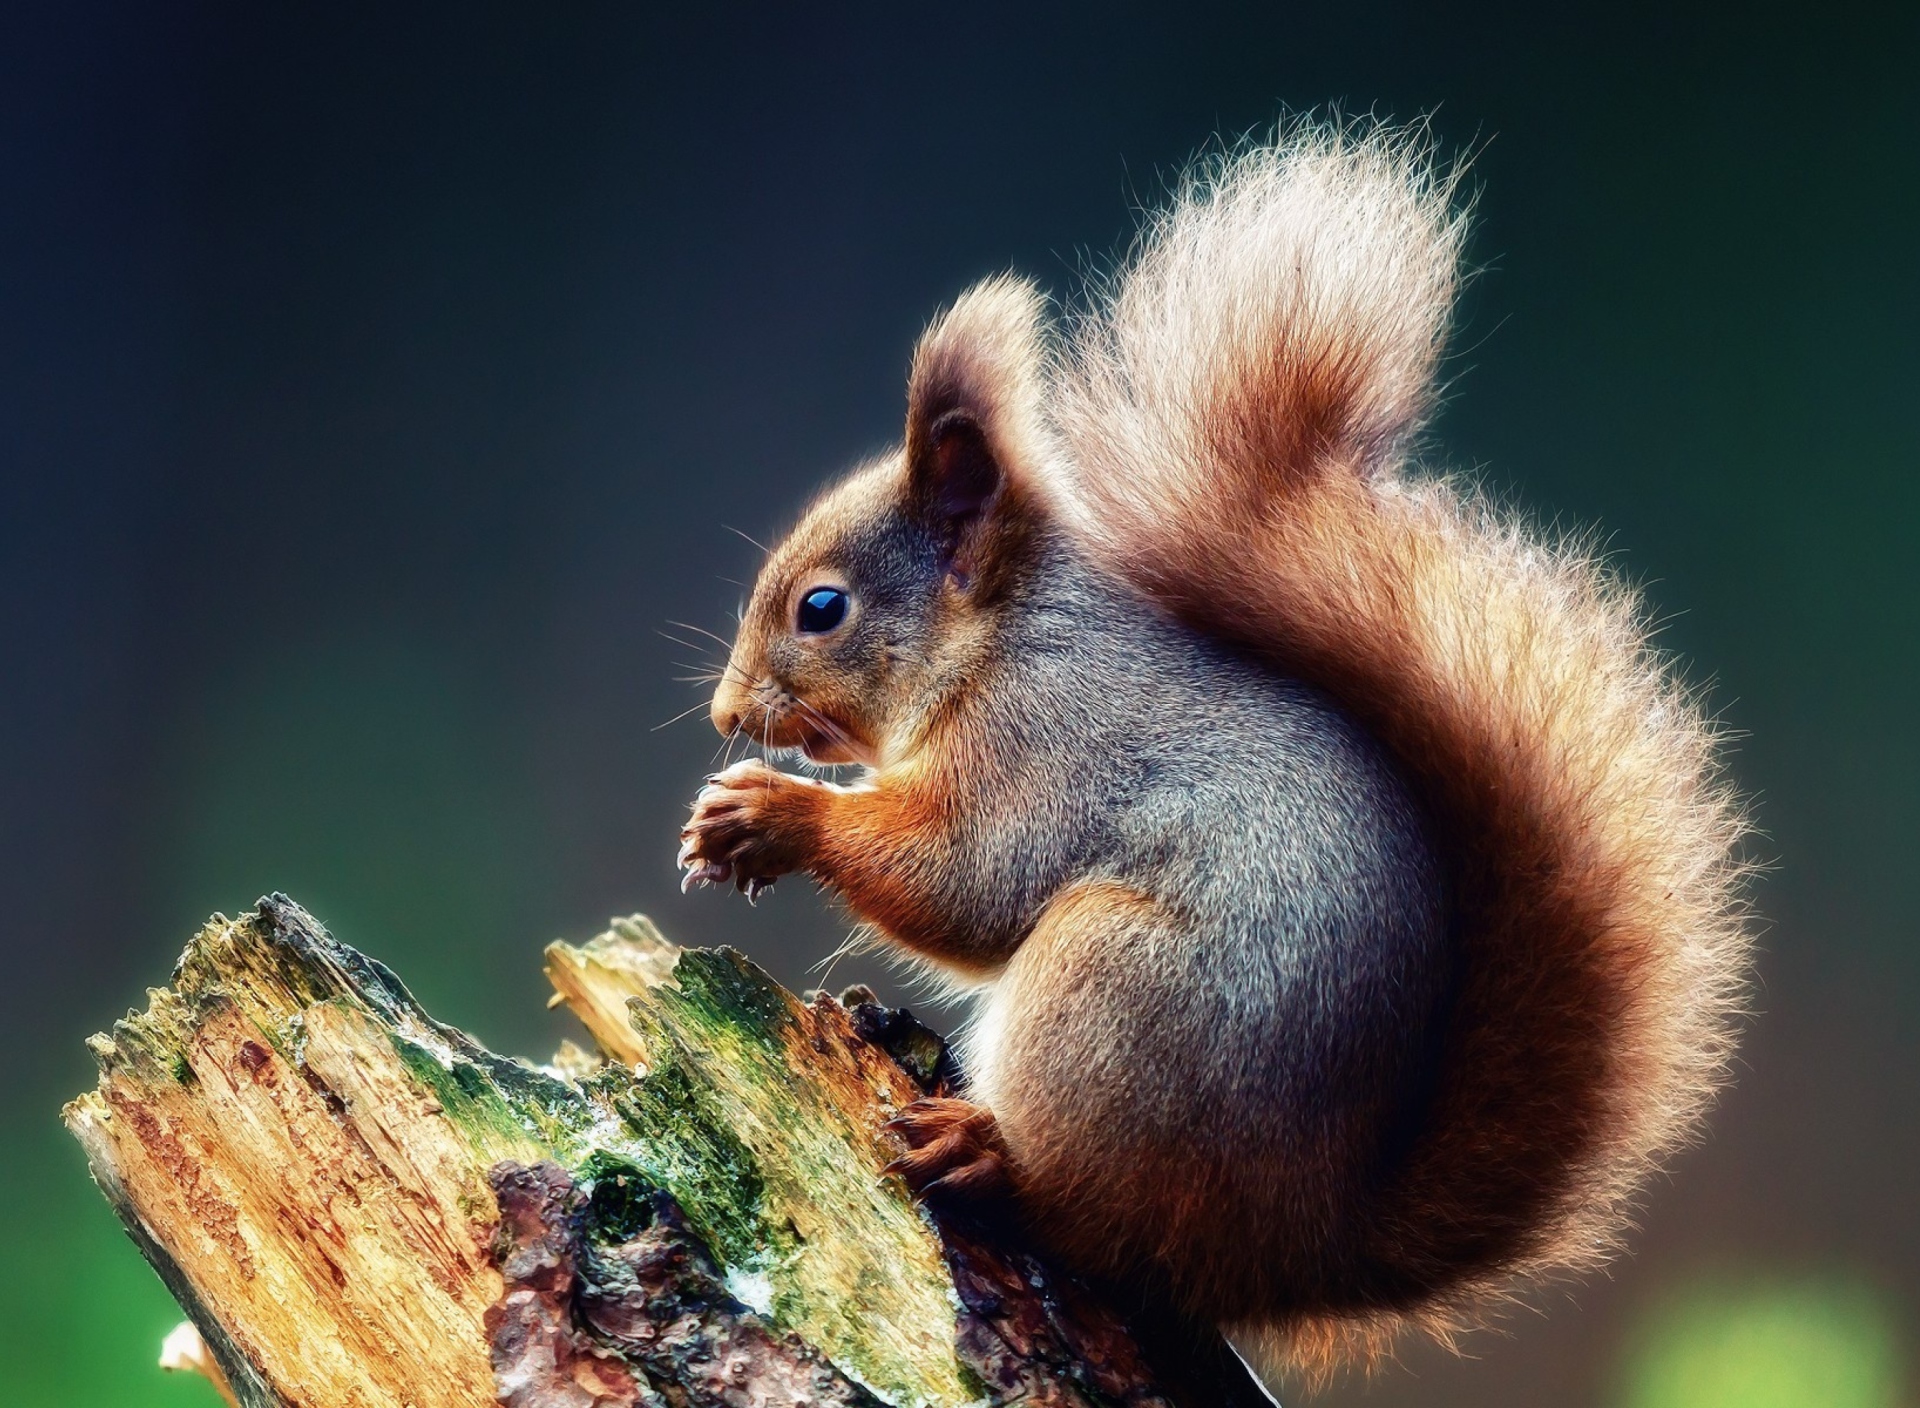 Squirrel Eating A Nut wallpaper 1920x1408